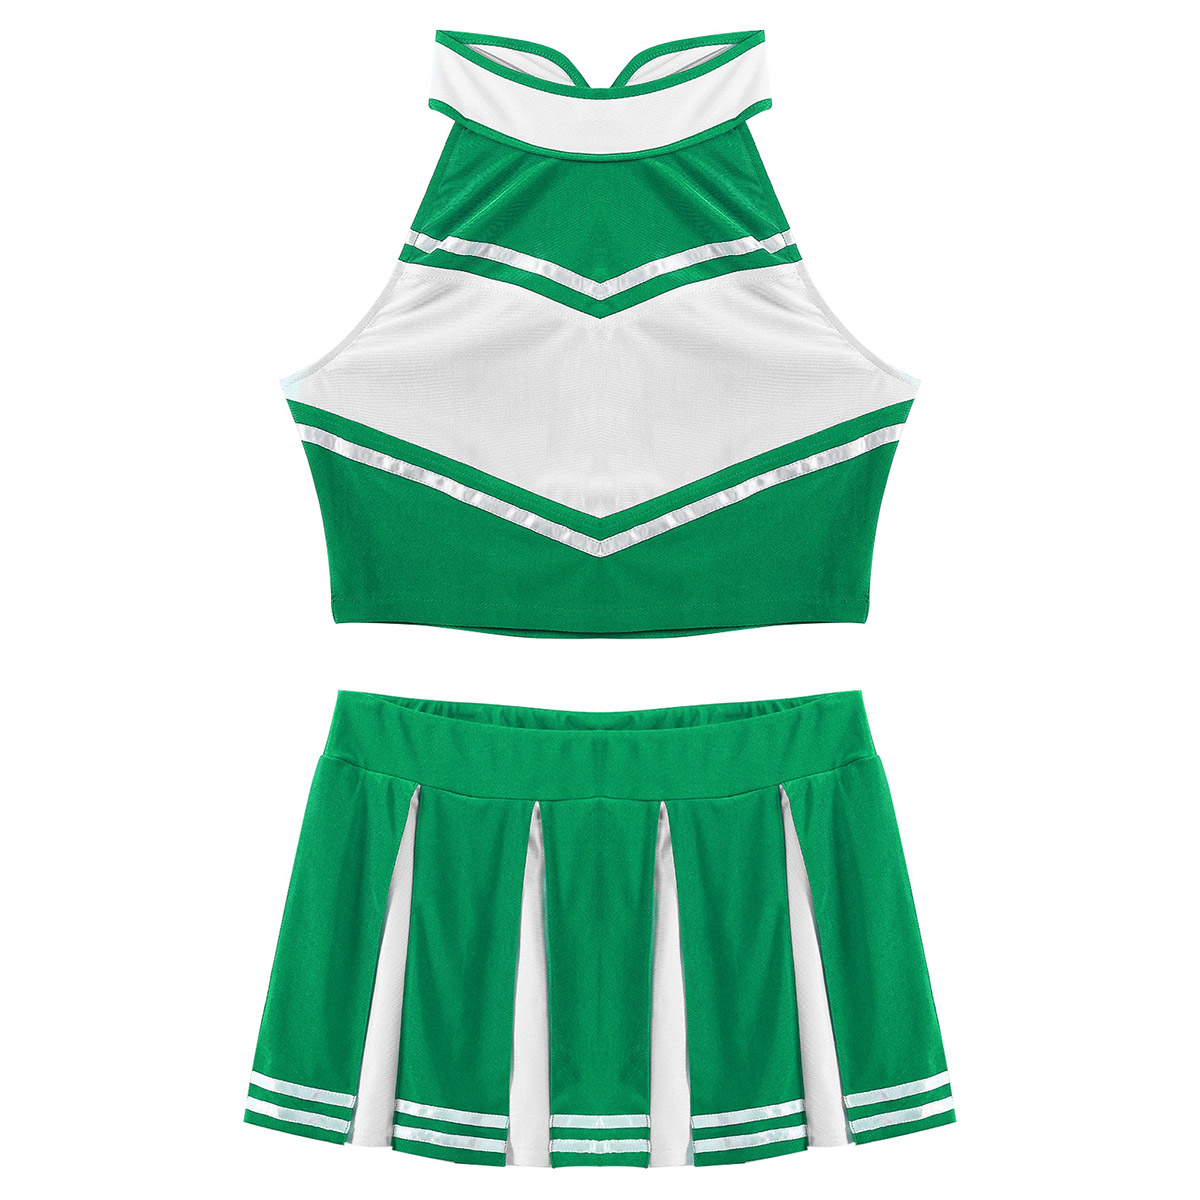 Women Adults Cheerleader Costume Uniform Cheerleading Outfit Stand Collar Sleeveless Crop Top Mini Pleated Skirt Stage Costumes